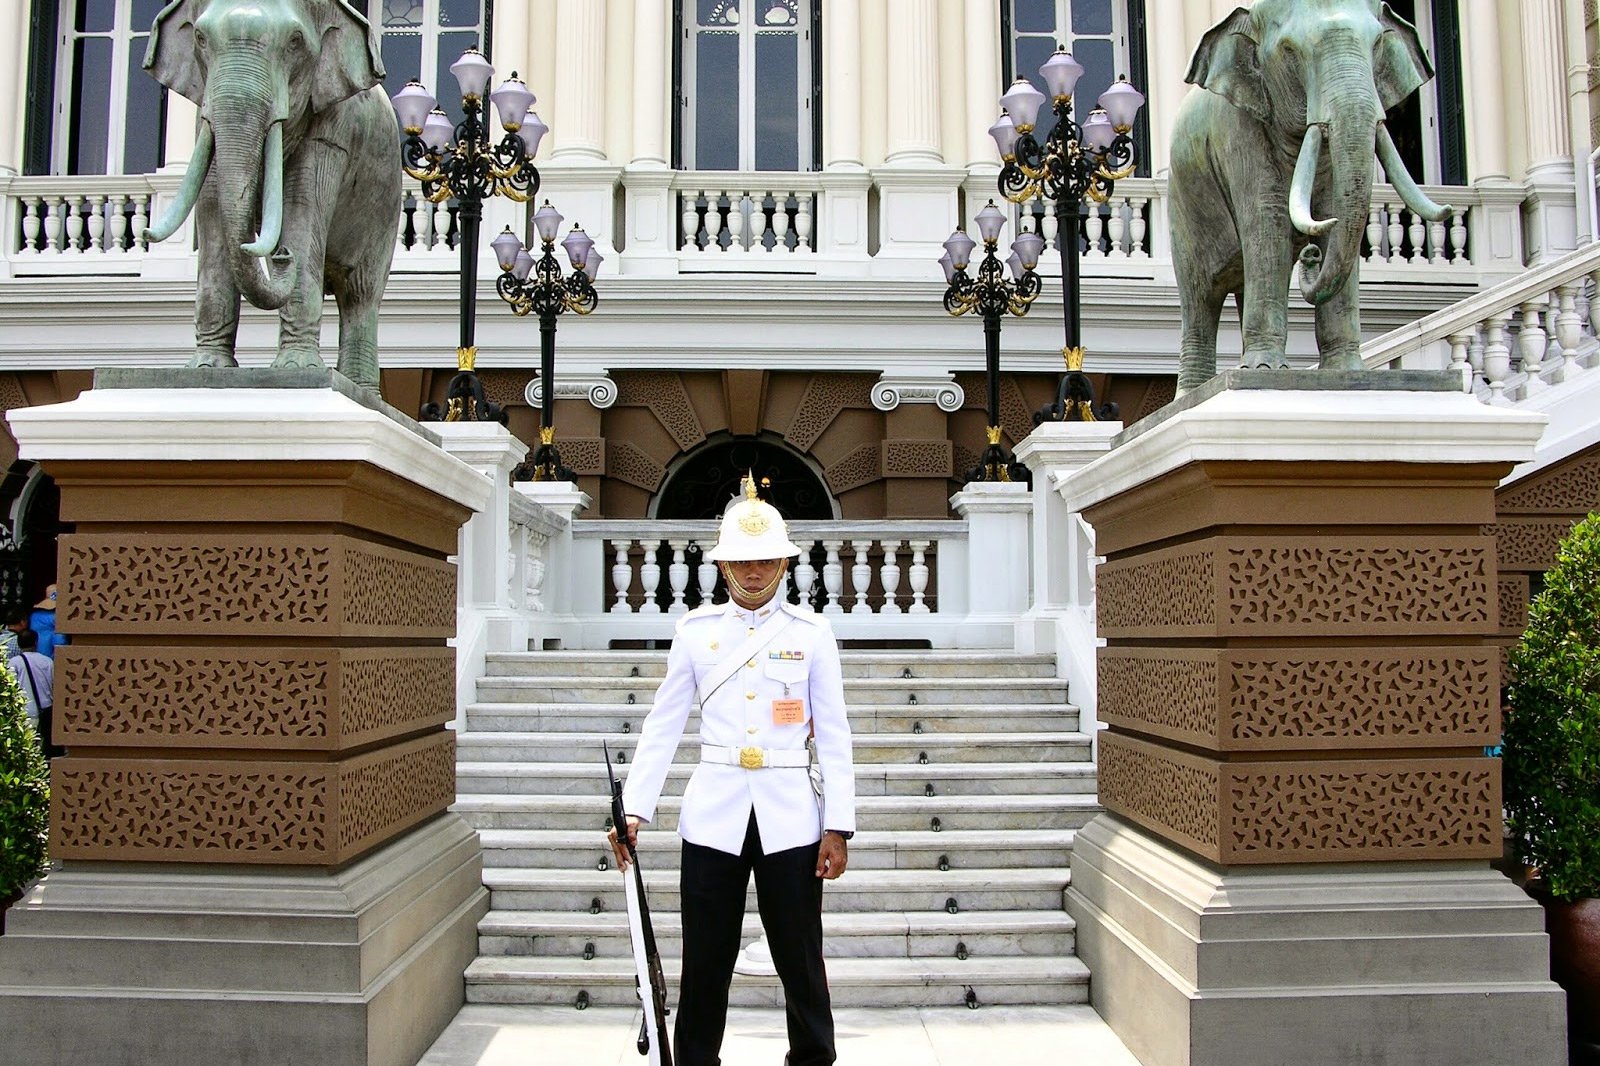 How to take a selfie with a guard at the Grand Palace in Bangkok